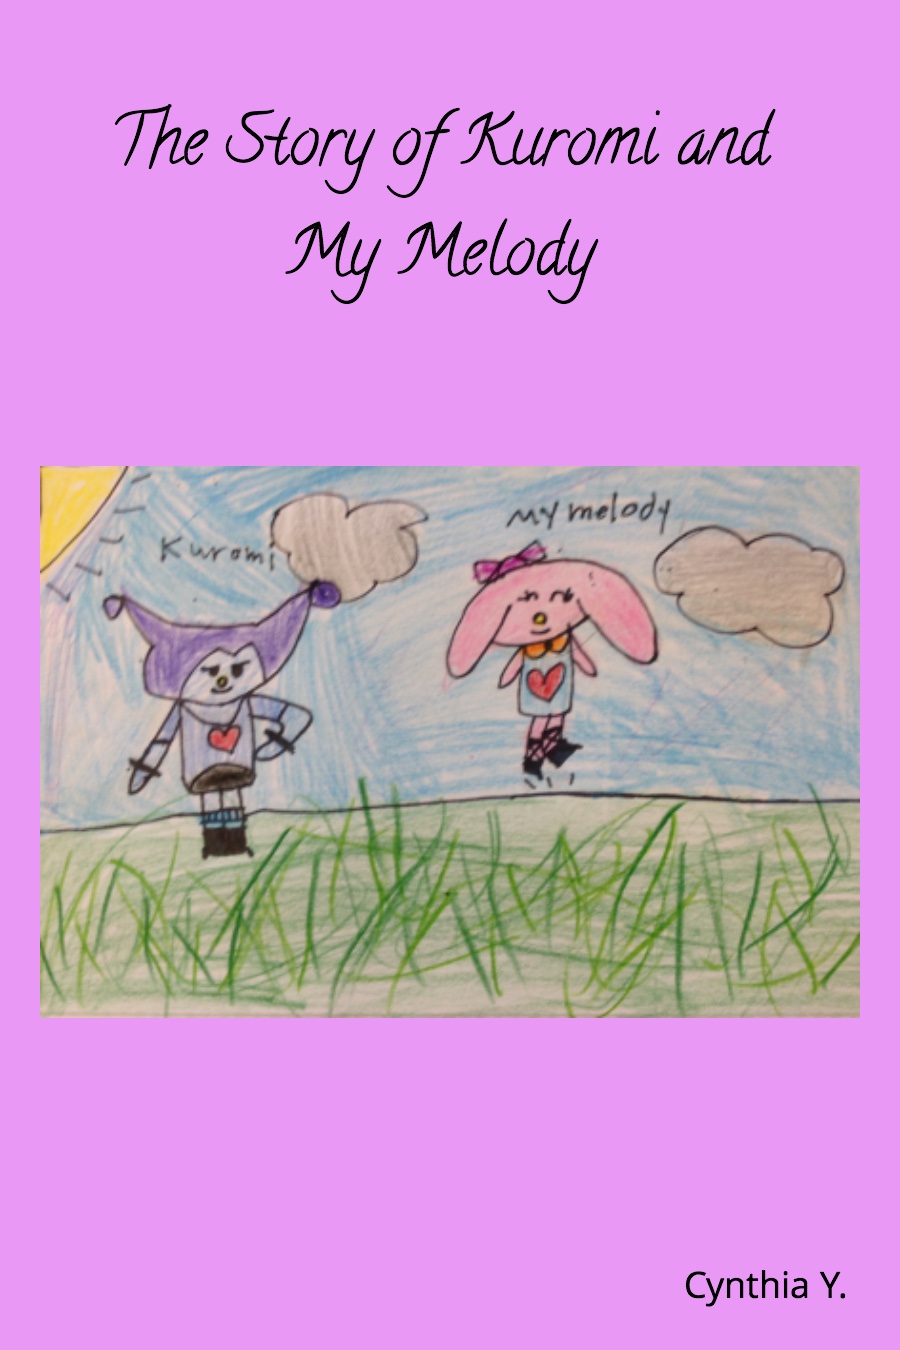 The Story of Kuromi and My Melody by Cynthia Y